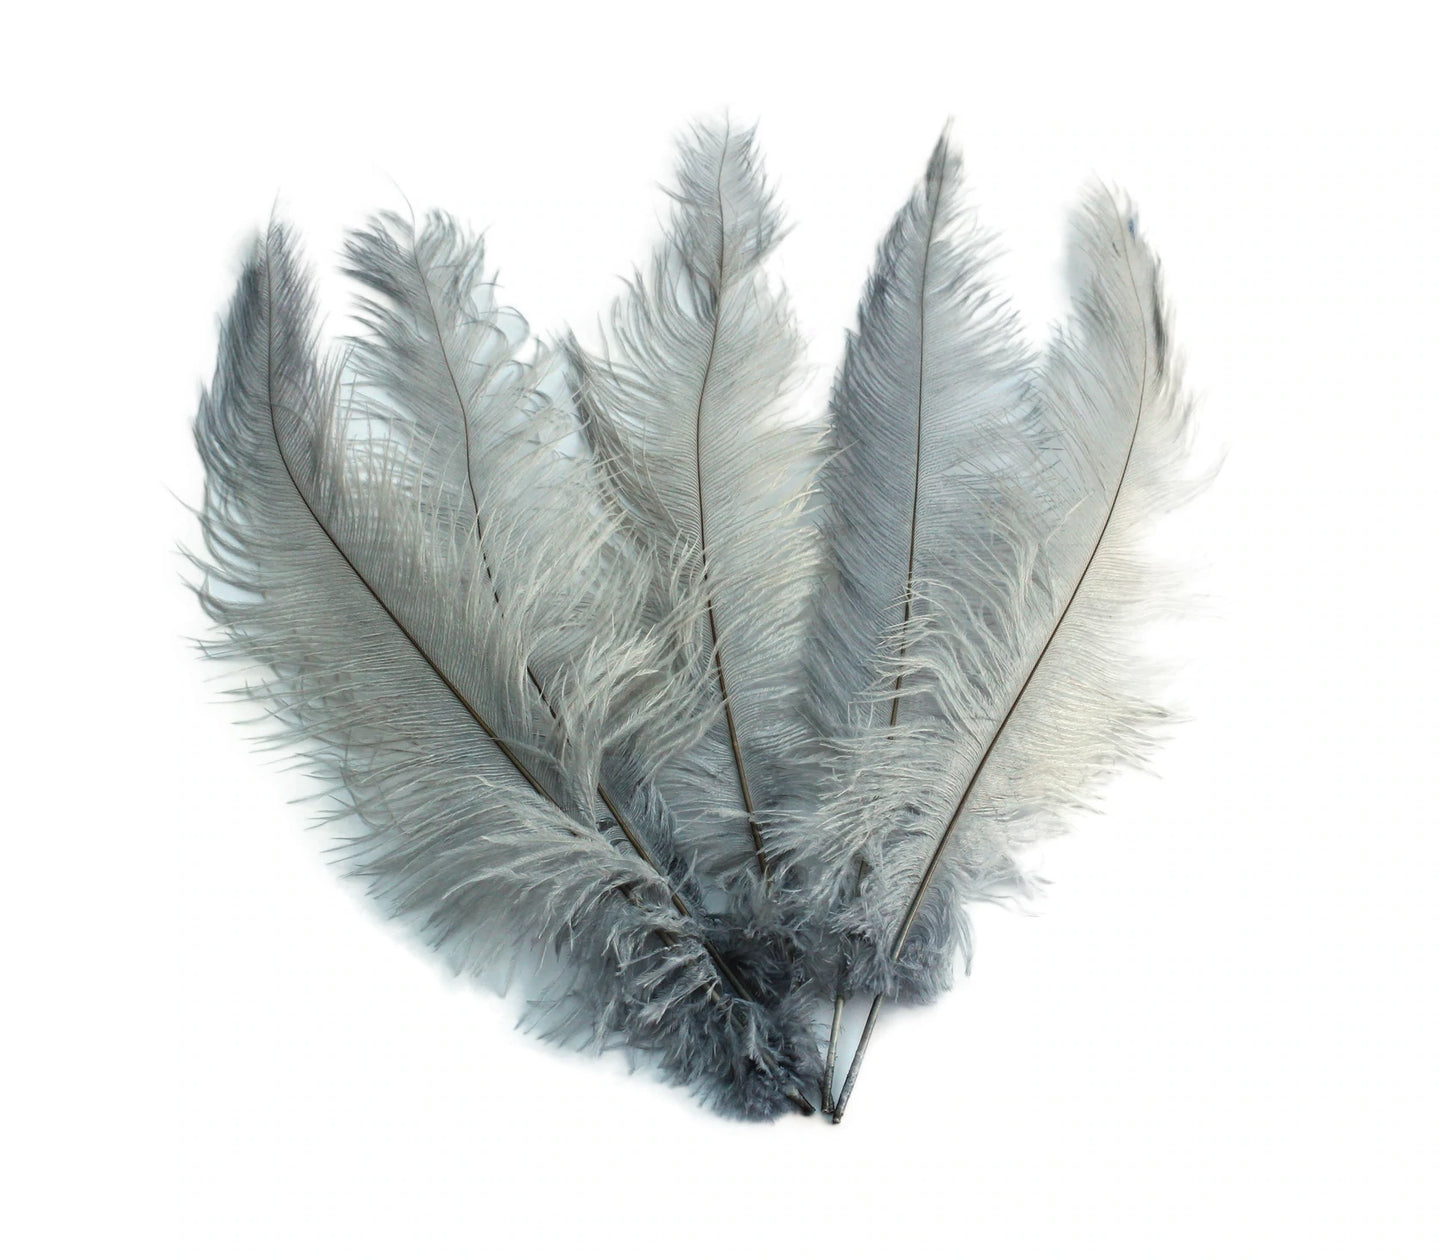 Ostrich Feather Spad Plumes 15-18" (Silver) - Buy Ostrich Feathers